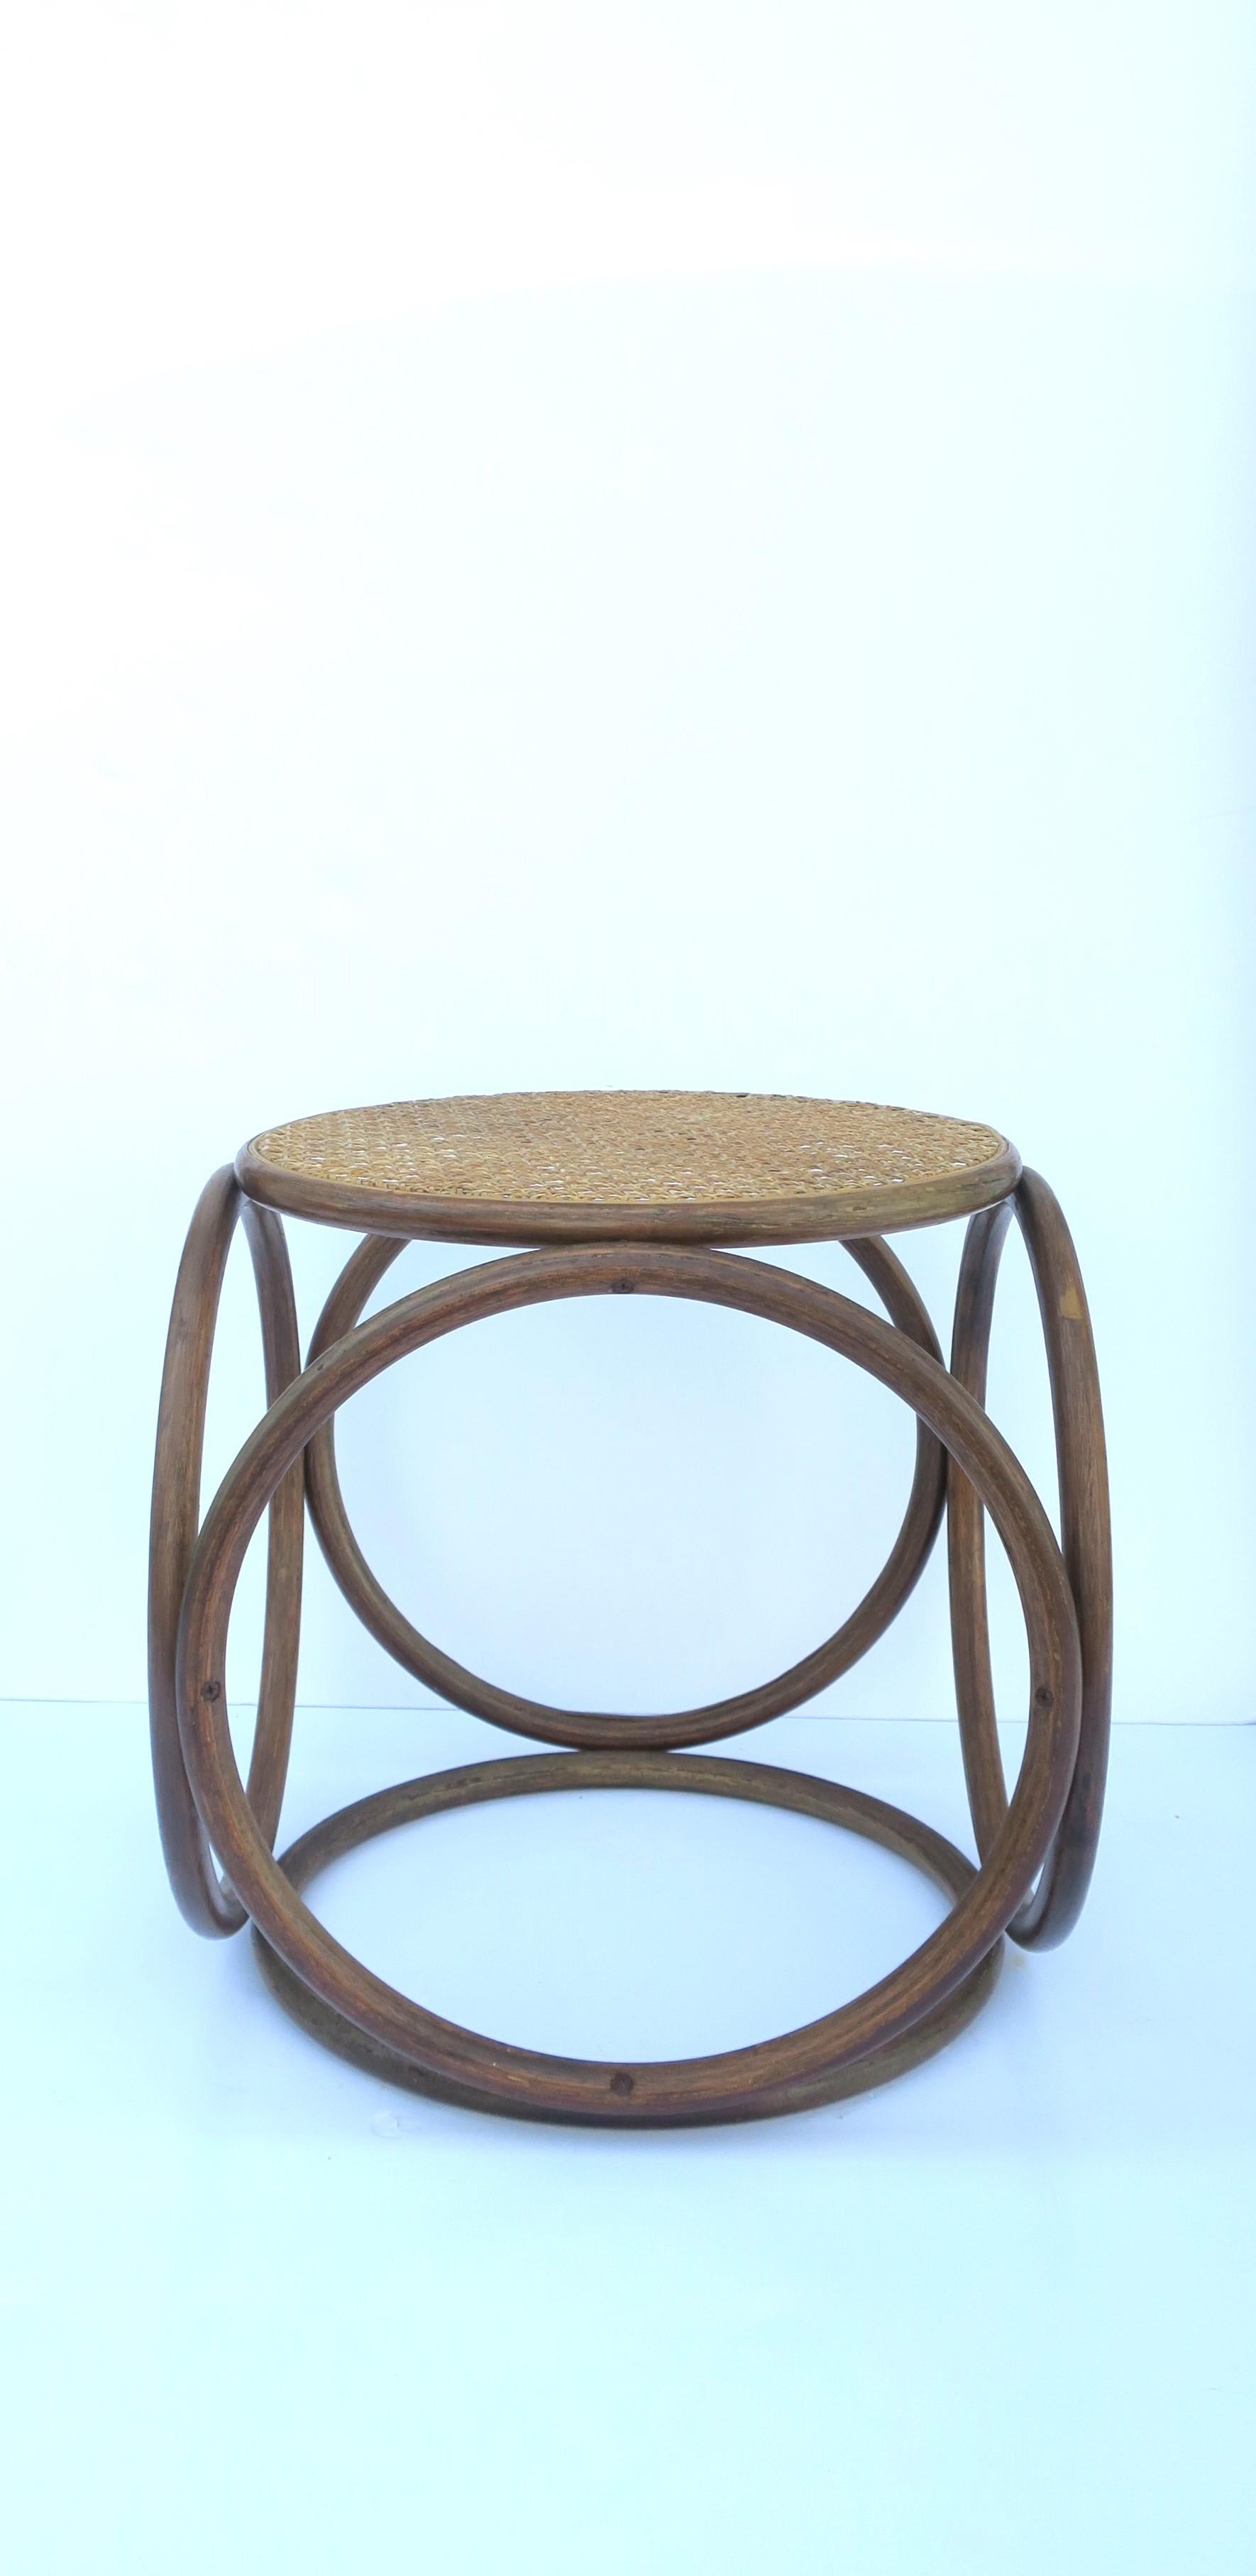 A modern bentwood and wicker cane top stool or side drinks table, in the style of Thonet, circa mid-20th century, Europe, possibly Austria. Piece works as a side drinks table or stool. 

Dimensions: 15.13